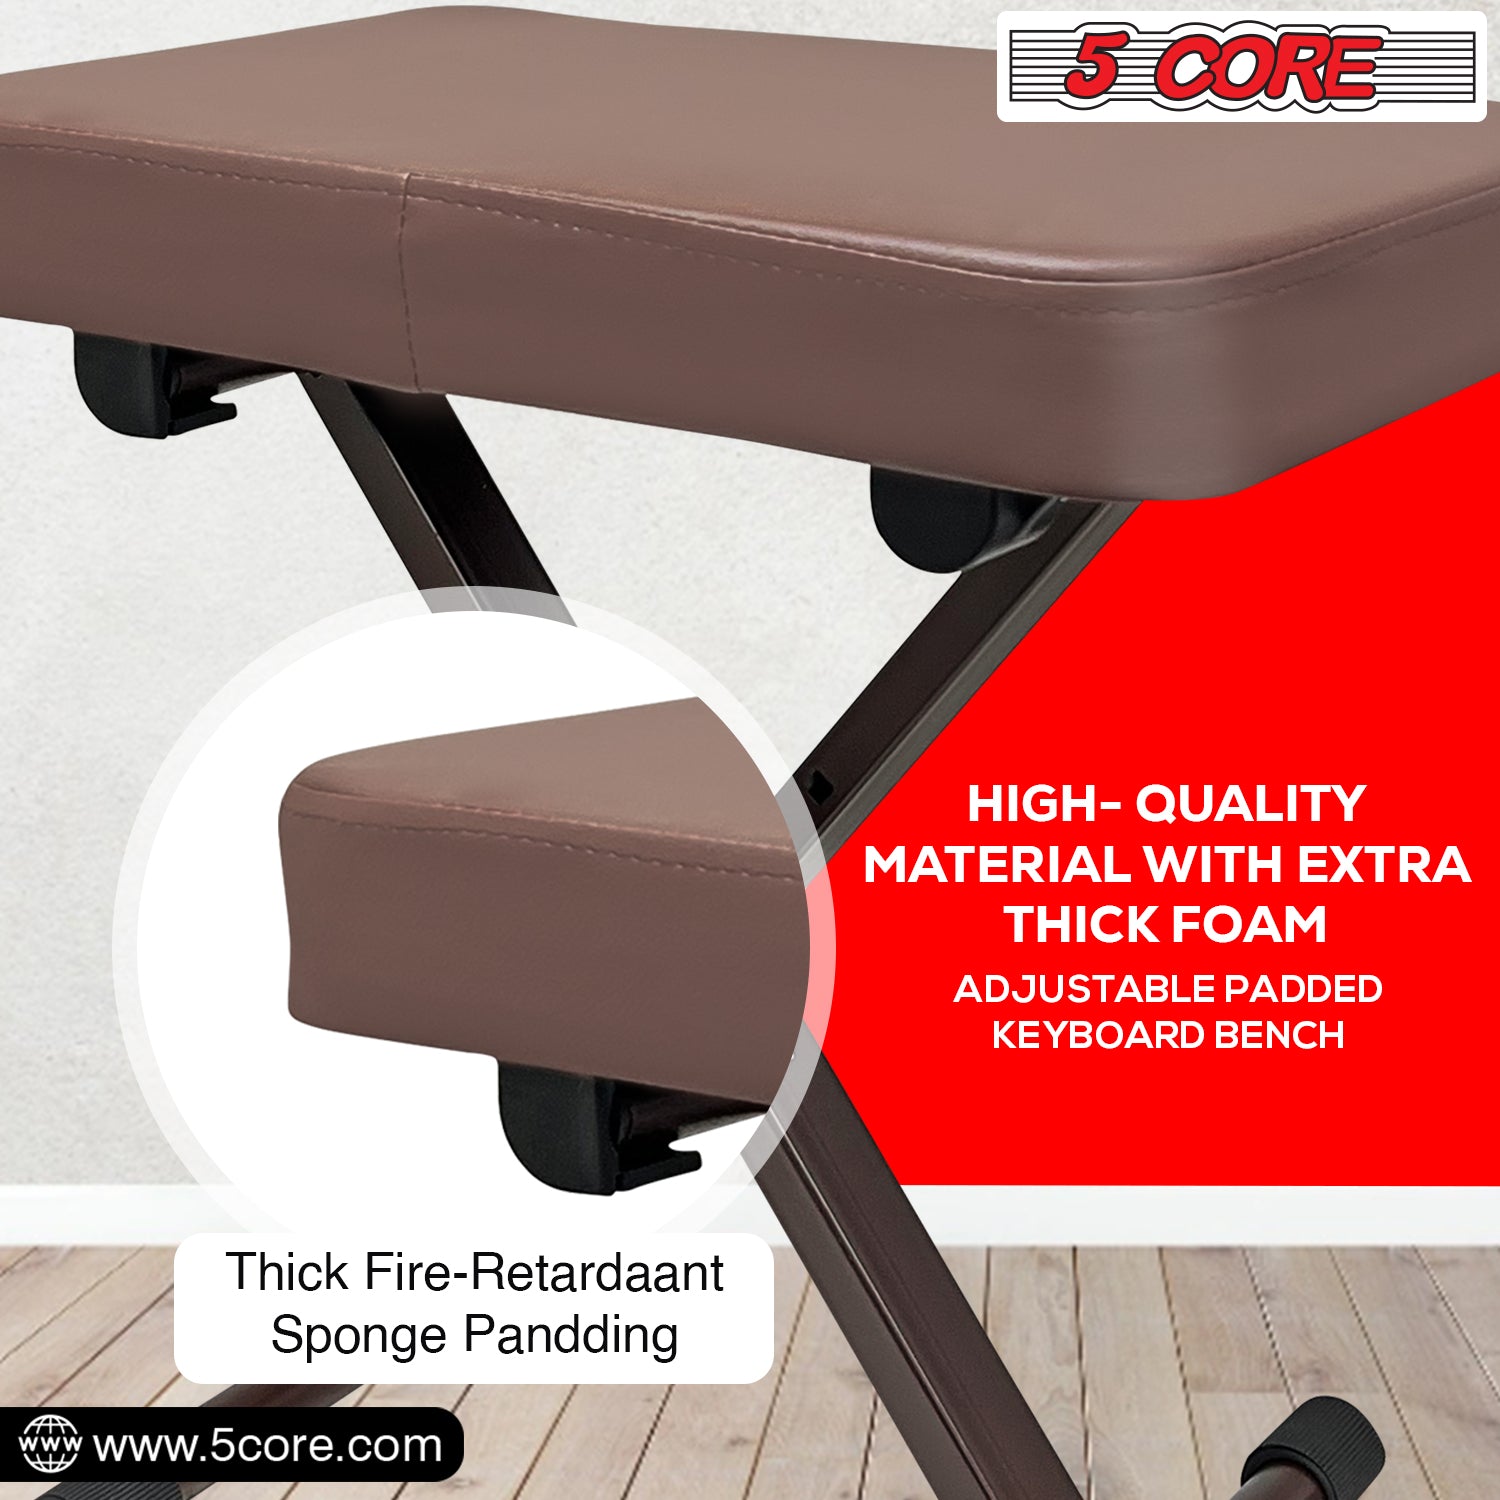 5 Core Adjustable Keyboard Bench 18.5 - 24.2 Inch Heavy Duty X style Bench Piano Stool Chair Thick And Padded Comfortable Guitar Stools -KBB BR HD